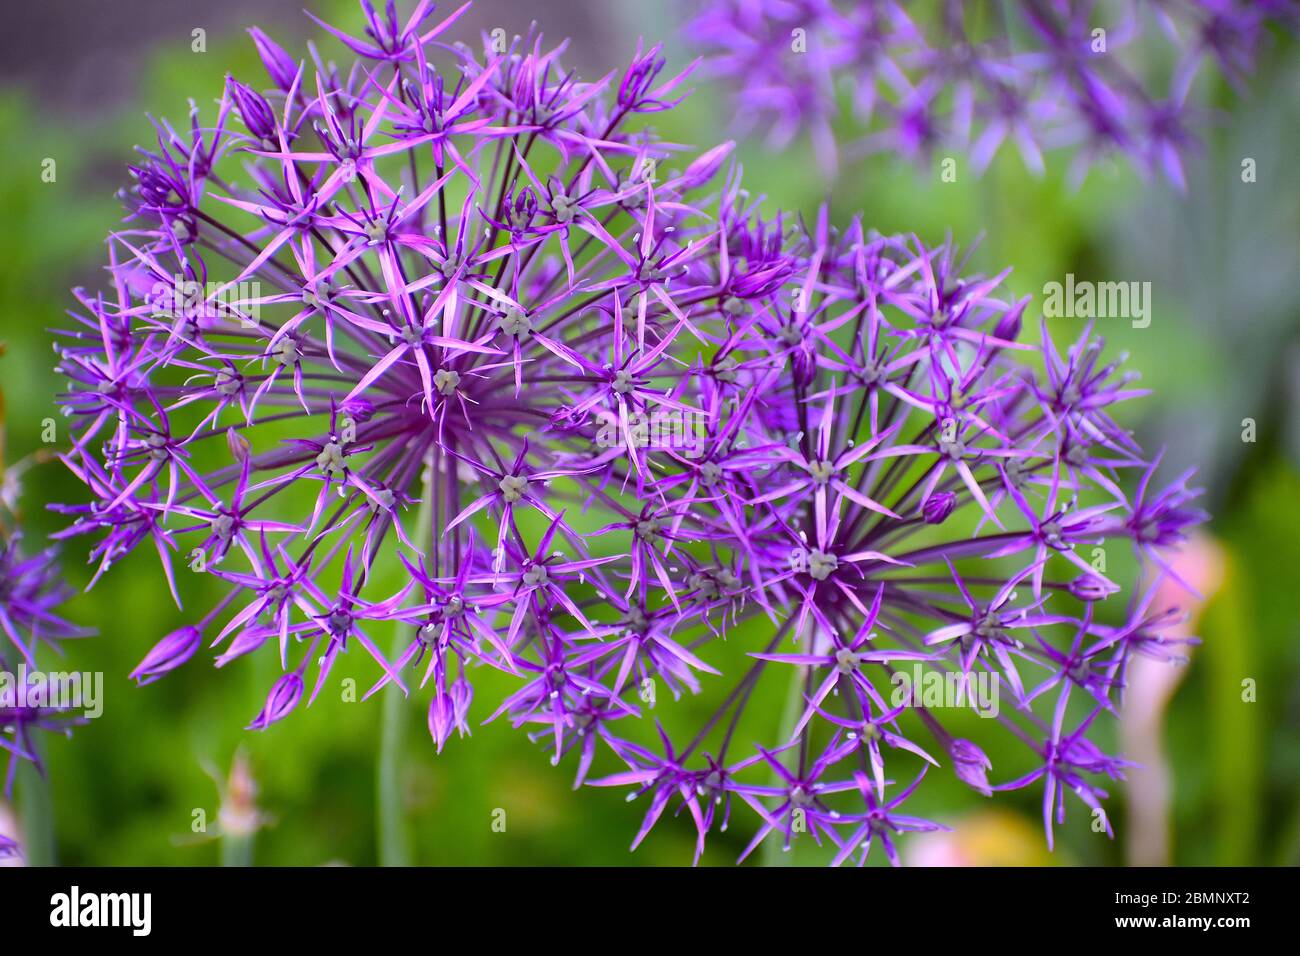 Allium Upright bulbous herbaceous perennial with strong onion garlic scent and star like flowers in rounded umbels of purple blooms on a leafless stem Stock Photo